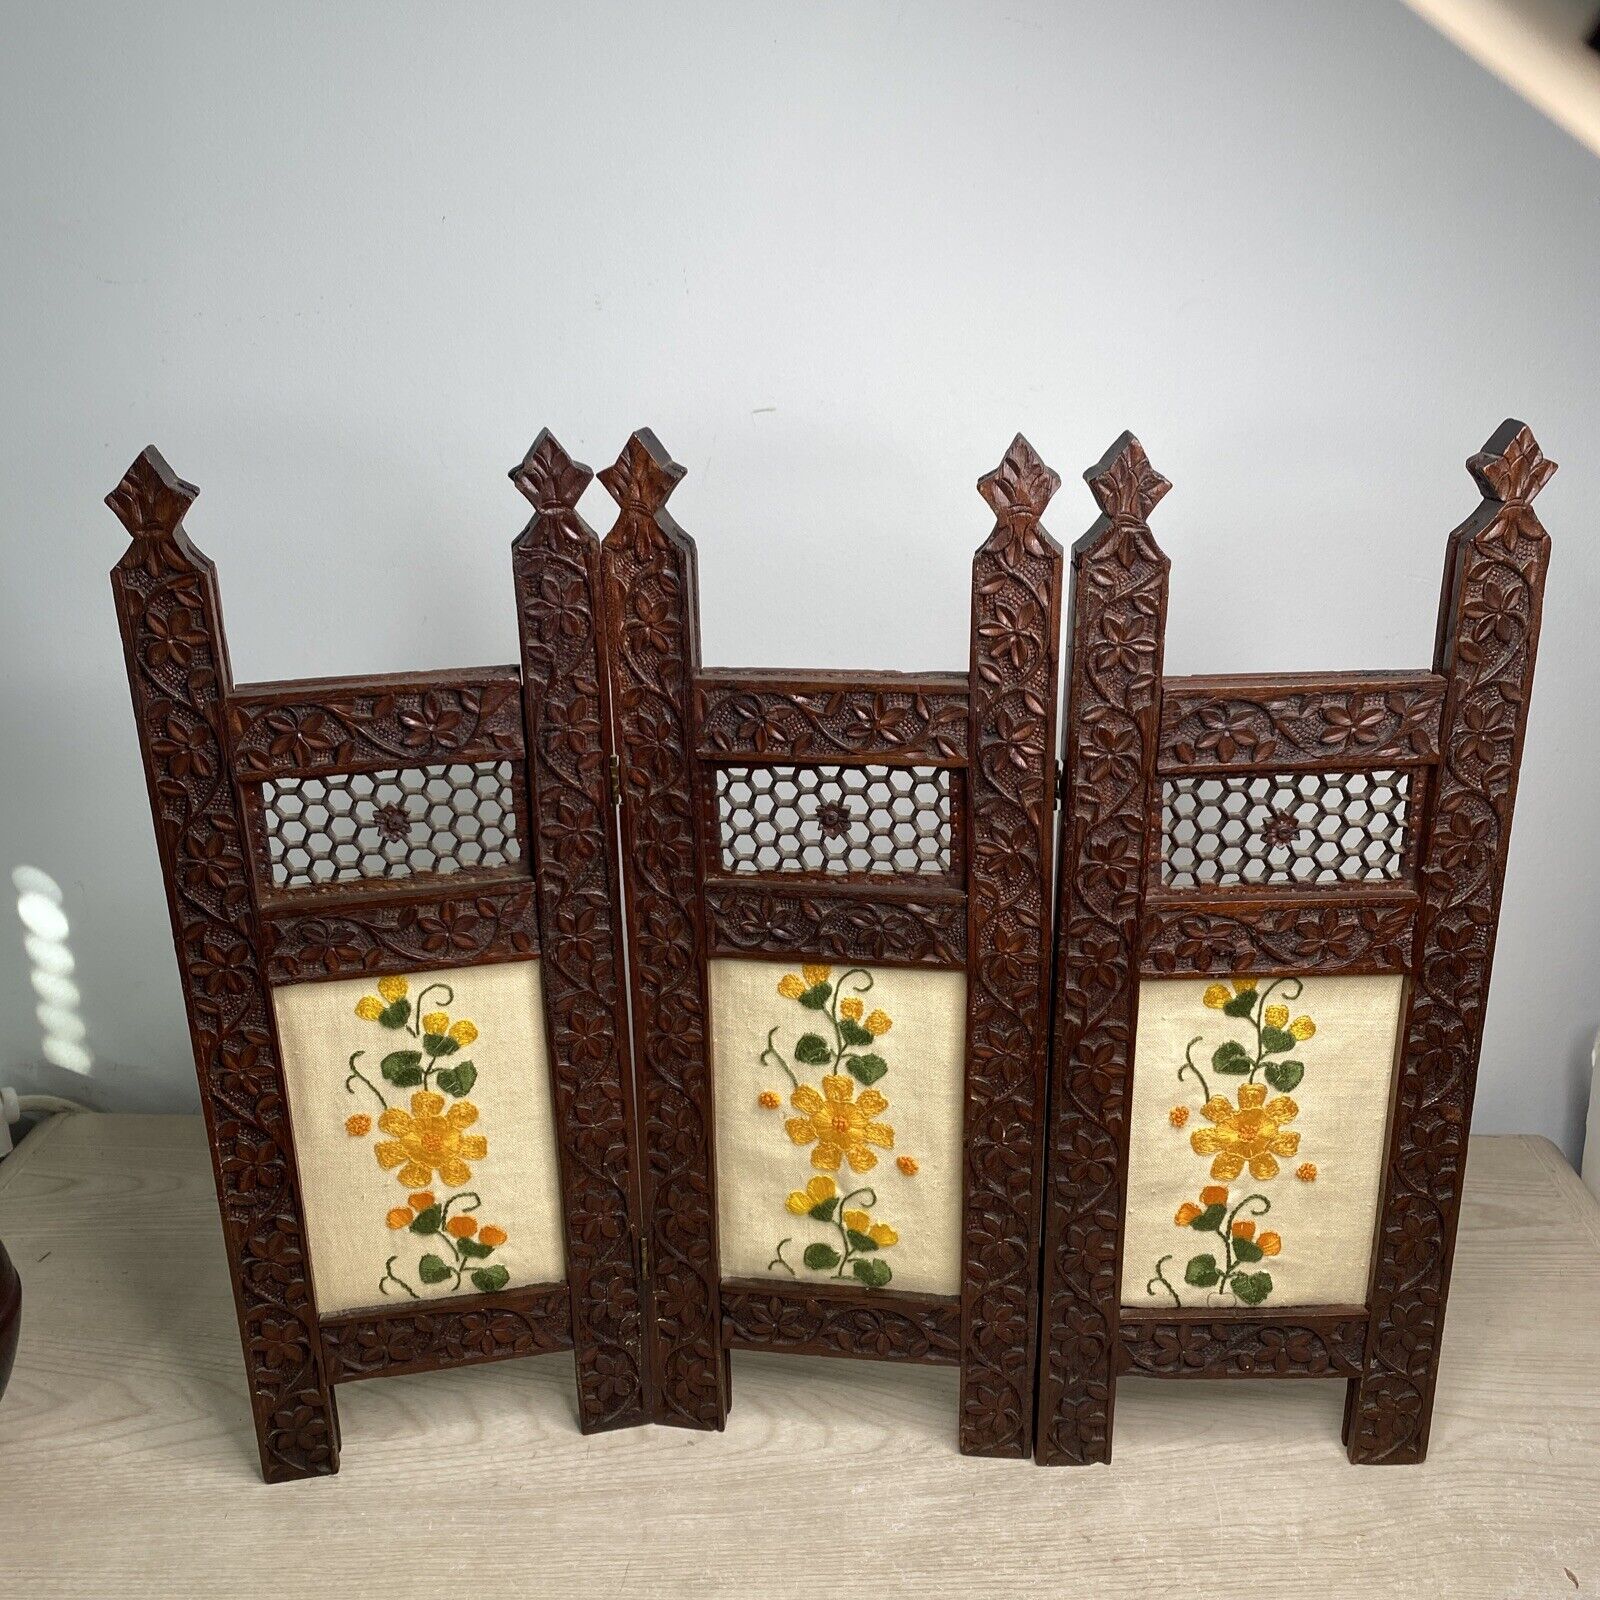 VTG Carved Wooden 3 panel Table Top Folding Screen embroidered Panel 17”Tx19.5”